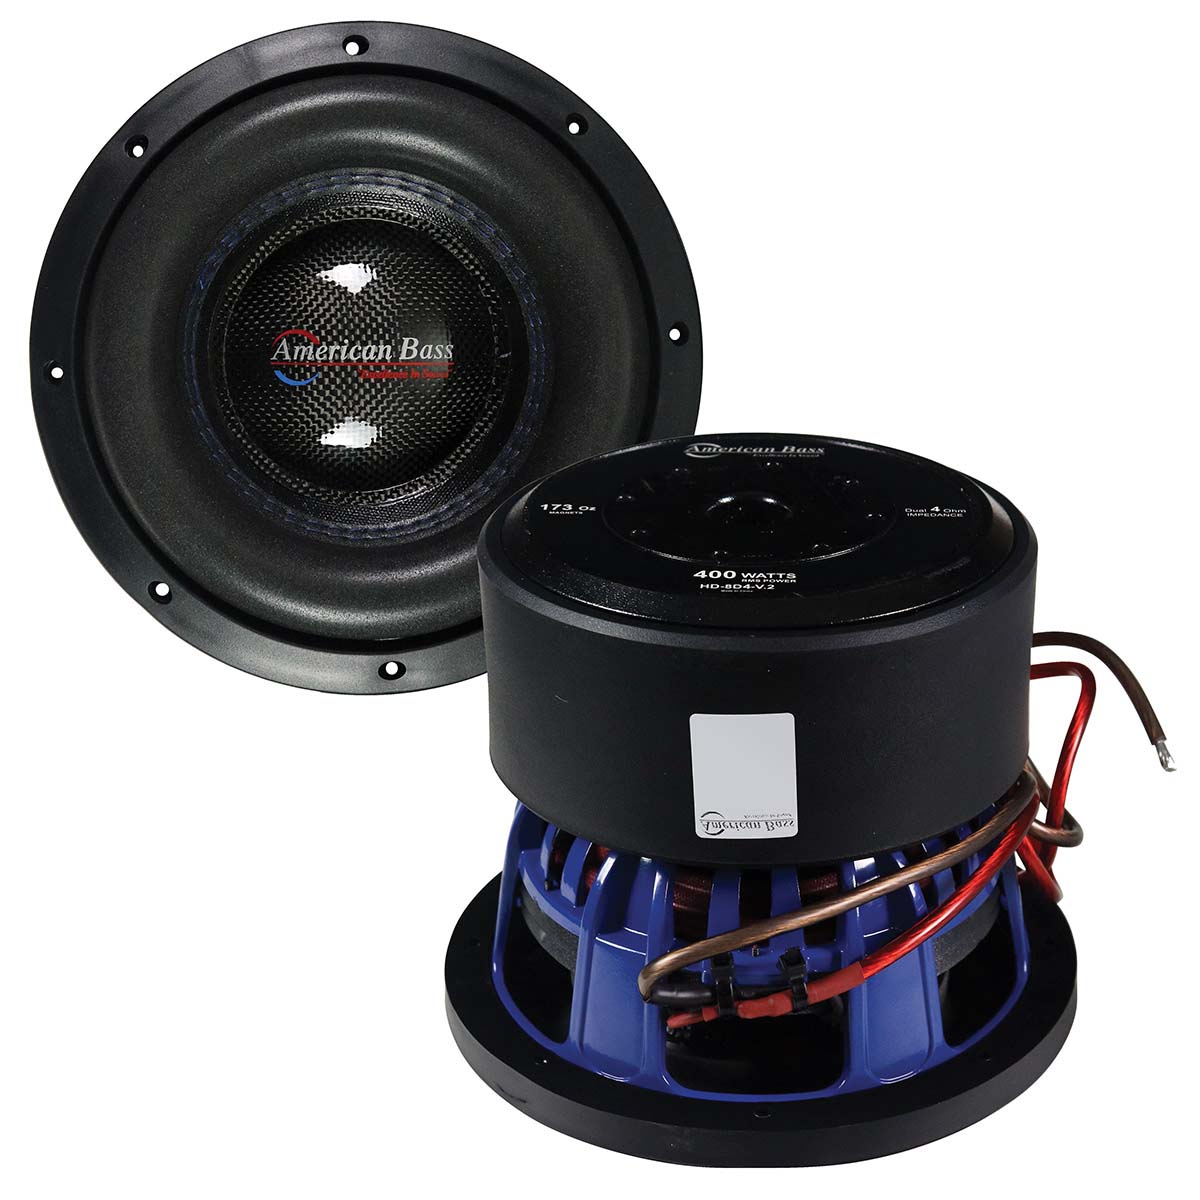 American Bass 8GC Woofer 400W RMS/800W Max Dual 4 Ohm Voice Coils